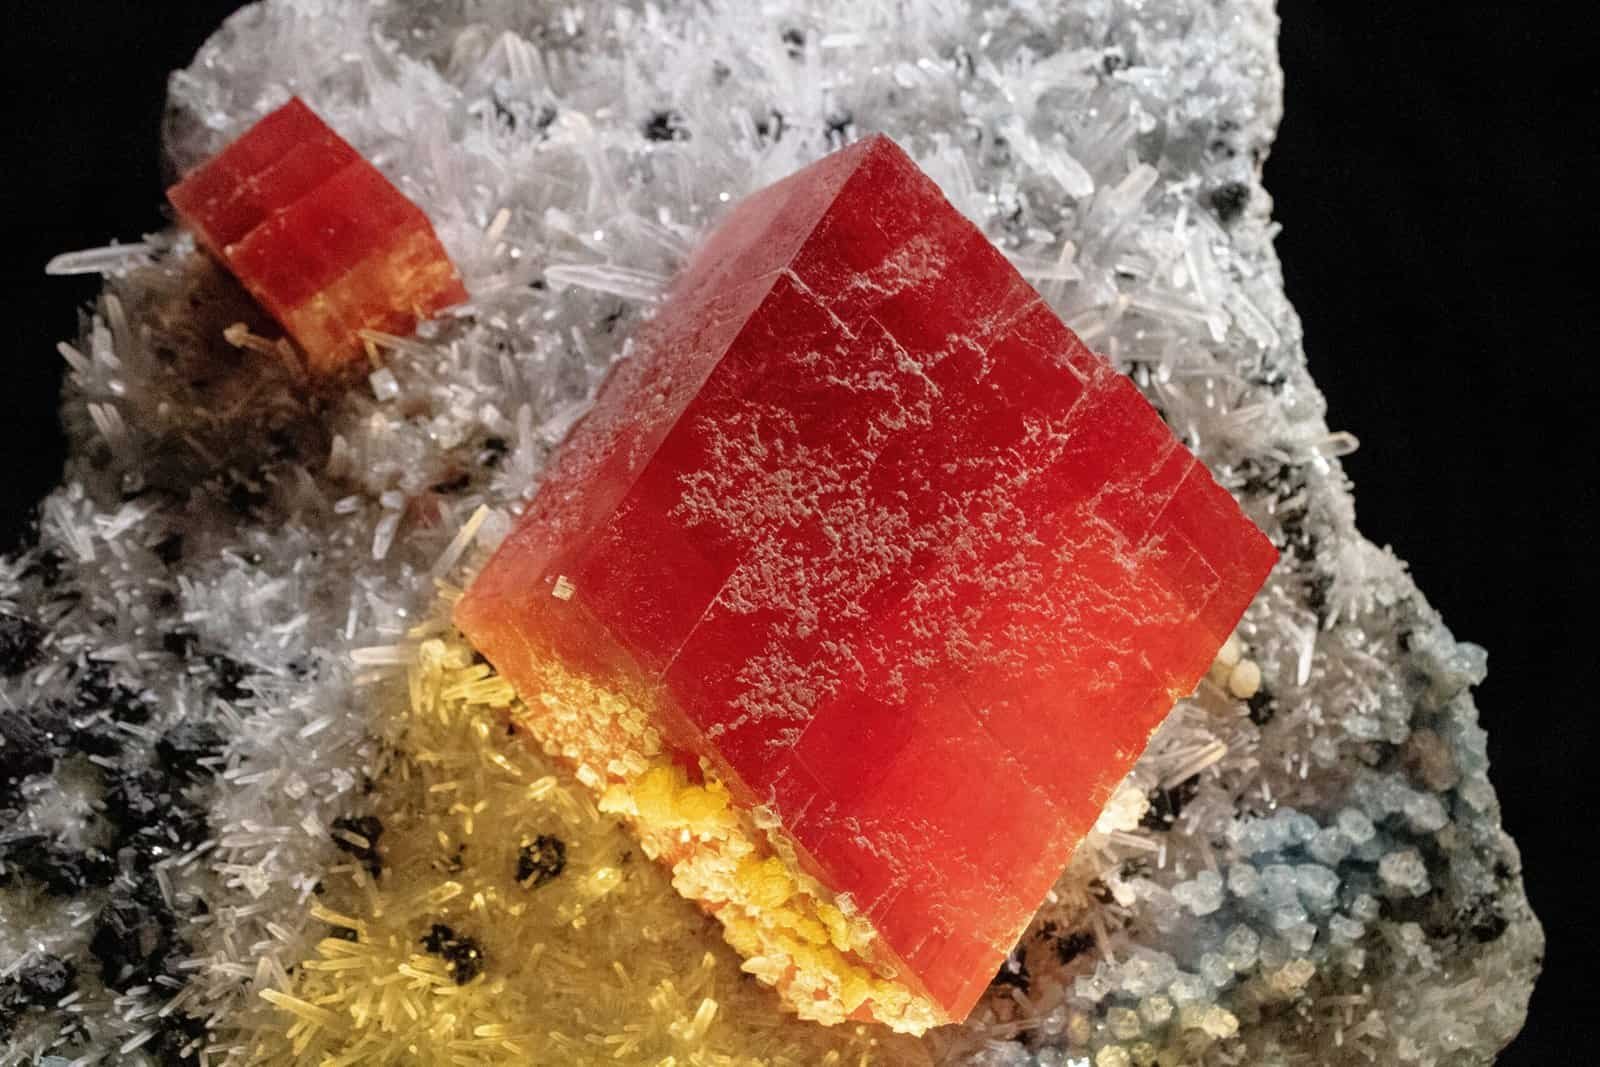 Red gemstone on display at the Denver Museum of Nature & Science.